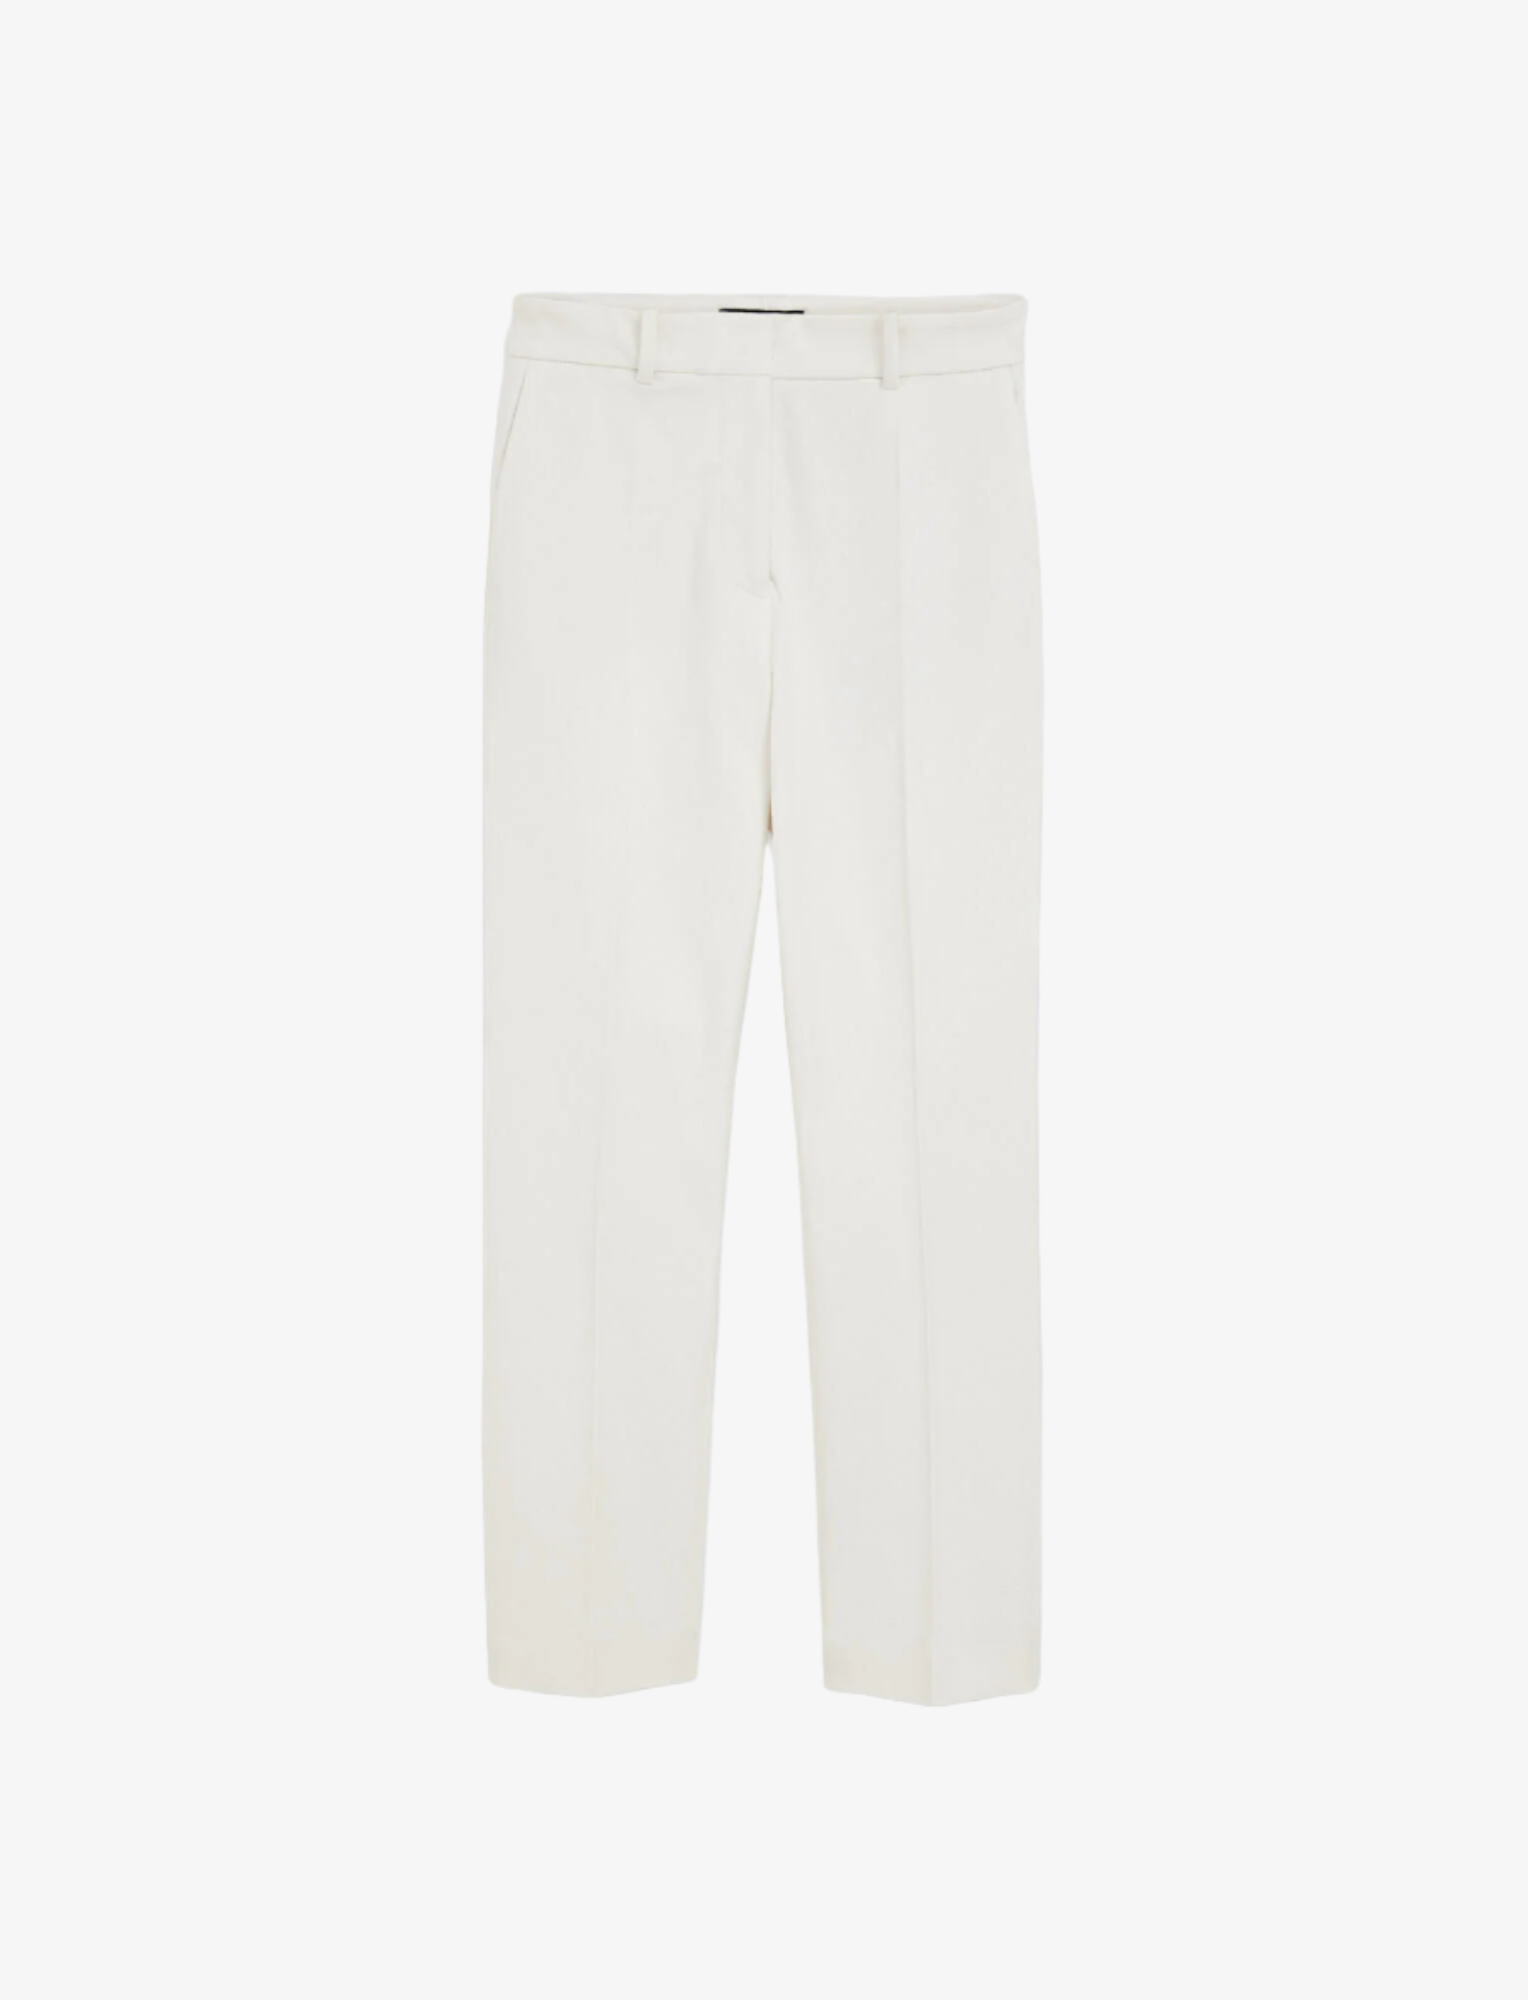 Gabardine stretch coleman trousers - oyster white Trousers